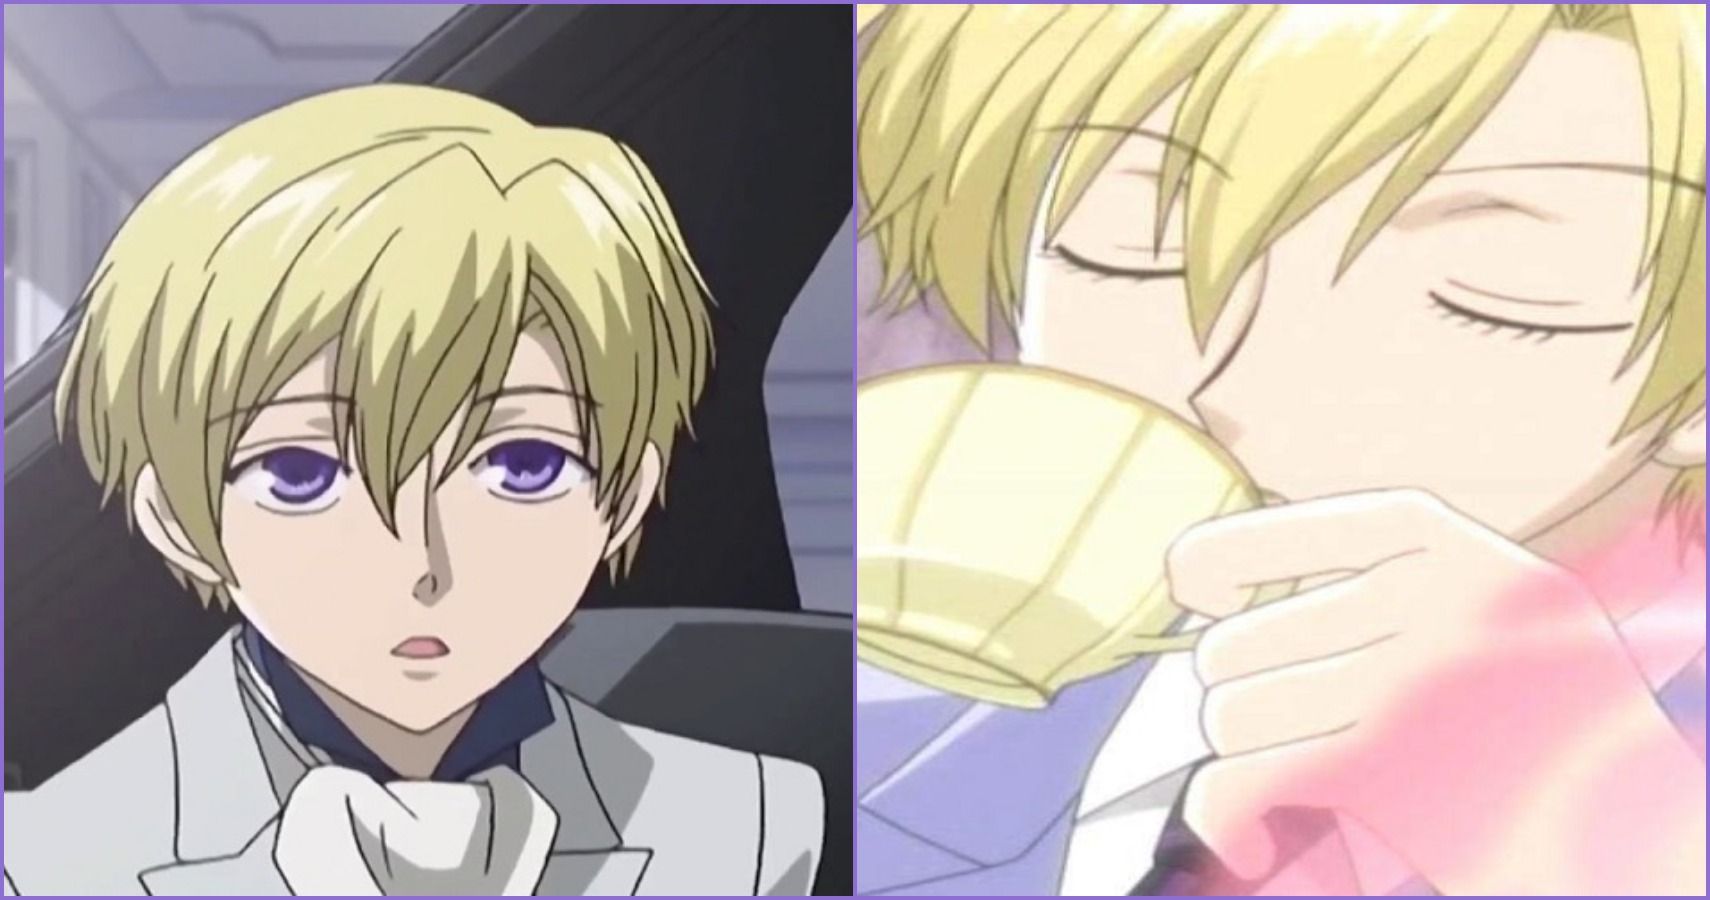 5. "Tamaki Suoh" from Ouran High School Host Club - wide 3